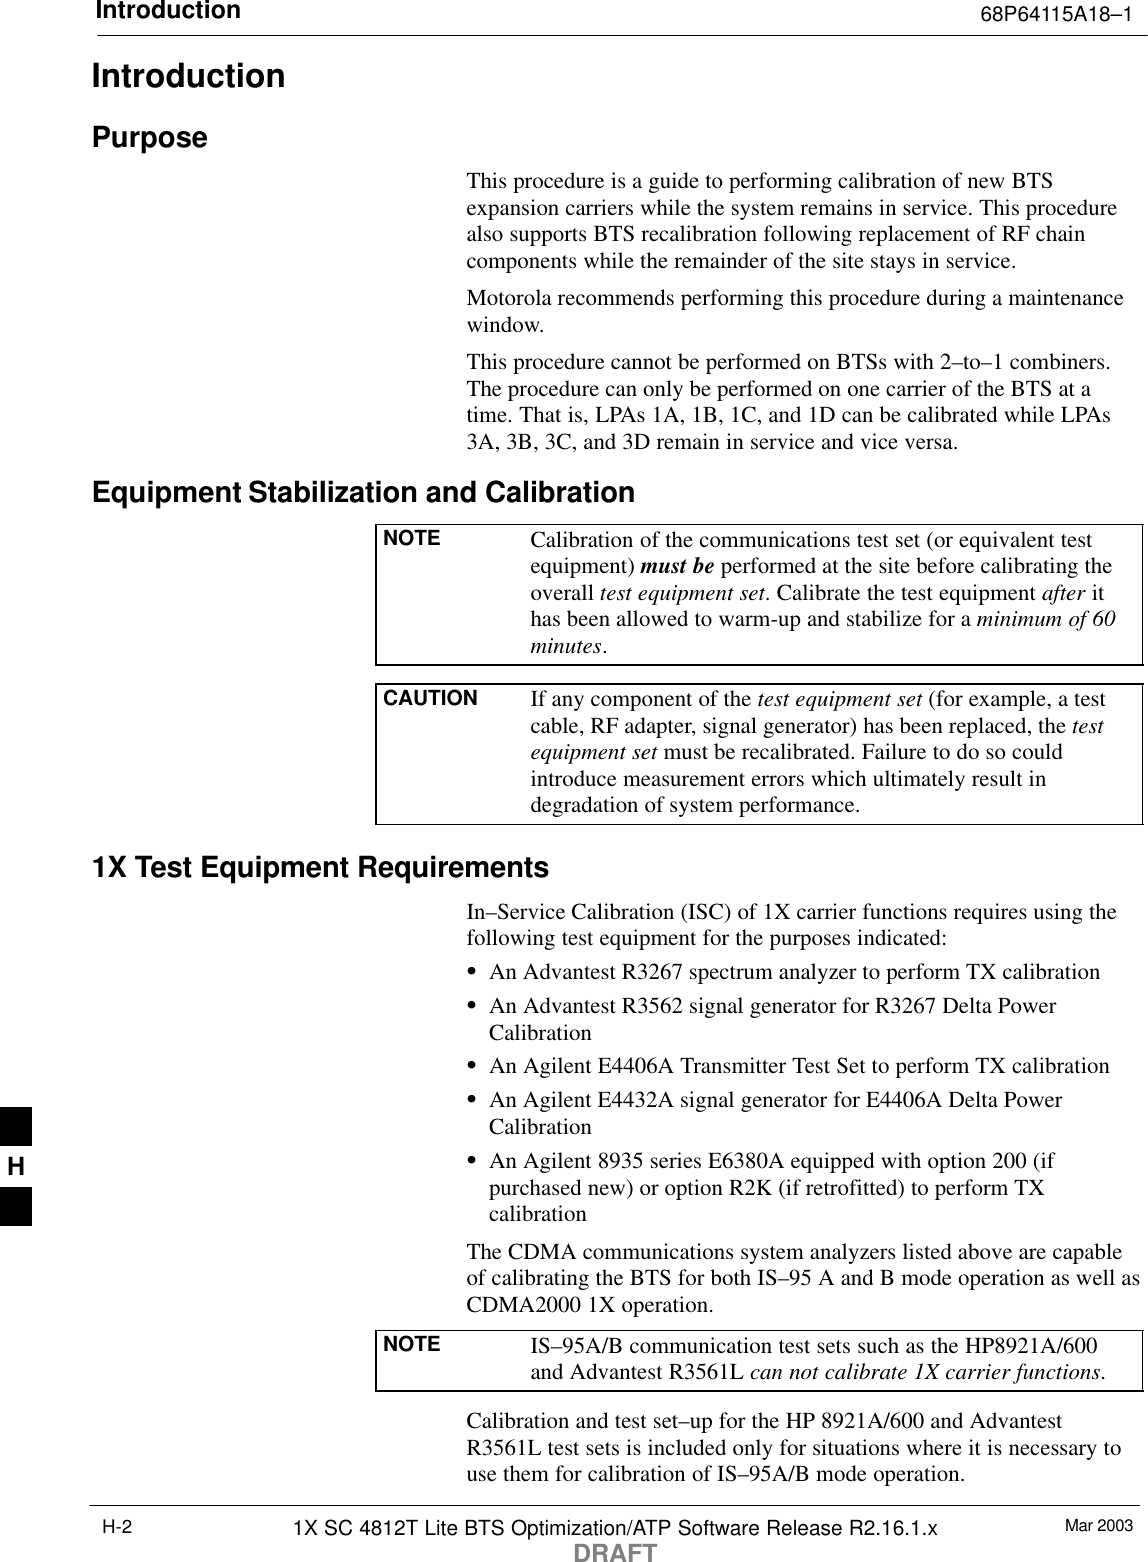 Introduction 68P64115A18–1Mar 20031X SC 4812T Lite BTS Optimization/ATP Software Release R2.16.1.xDRAFTH-2IntroductionPurposeThis procedure is a guide to performing calibration of new BTSexpansion carriers while the system remains in service. This procedurealso supports BTS recalibration following replacement of RF chaincomponents while the remainder of the site stays in service.Motorola recommends performing this procedure during a maintenancewindow.This procedure cannot be performed on BTSs with 2–to–1 combiners.The procedure can only be performed on one carrier of the BTS at atime. That is, LPAs 1A, 1B, 1C, and 1D can be calibrated while LPAs3A, 3B, 3C, and 3D remain in service and vice versa.Equipment Stabilization and CalibrationNOTE Calibration of the communications test set (or equivalent testequipment) must be performed at the site before calibrating theoverall test equipment set. Calibrate the test equipment after ithas been allowed to warm-up and stabilize for a minimum of 60minutes.CAUTION If any component of the test equipment set (for example, a testcable, RF adapter, signal generator) has been replaced, the testequipment set must be recalibrated. Failure to do so couldintroduce measurement errors which ultimately result indegradation of system performance.1X Test Equipment RequirementsIn–Service Calibration (ISC) of 1X carrier functions requires using thefollowing test equipment for the purposes indicated:SAn Advantest R3267 spectrum analyzer to perform TX calibrationSAn Advantest R3562 signal generator for R3267 Delta PowerCalibrationSAn Agilent E4406A Transmitter Test Set to perform TX calibrationSAn Agilent E4432A signal generator for E4406A Delta PowerCalibrationSAn Agilent 8935 series E6380A equipped with option 200 (ifpurchased new) or option R2K (if retrofitted) to perform TXcalibrationThe CDMA communications system analyzers listed above are capableof calibrating the BTS for both IS–95 A and B mode operation as well asCDMA2000 1X operation.NOTE IS–95A/B communication test sets such as the HP8921A/600and Advantest R3561L can not calibrate 1X carrier functions.Calibration and test set–up for the HP 8921A/600 and AdvantestR3561L test sets is included only for situations where it is necessary touse them for calibration of IS–95A/B mode operation.H